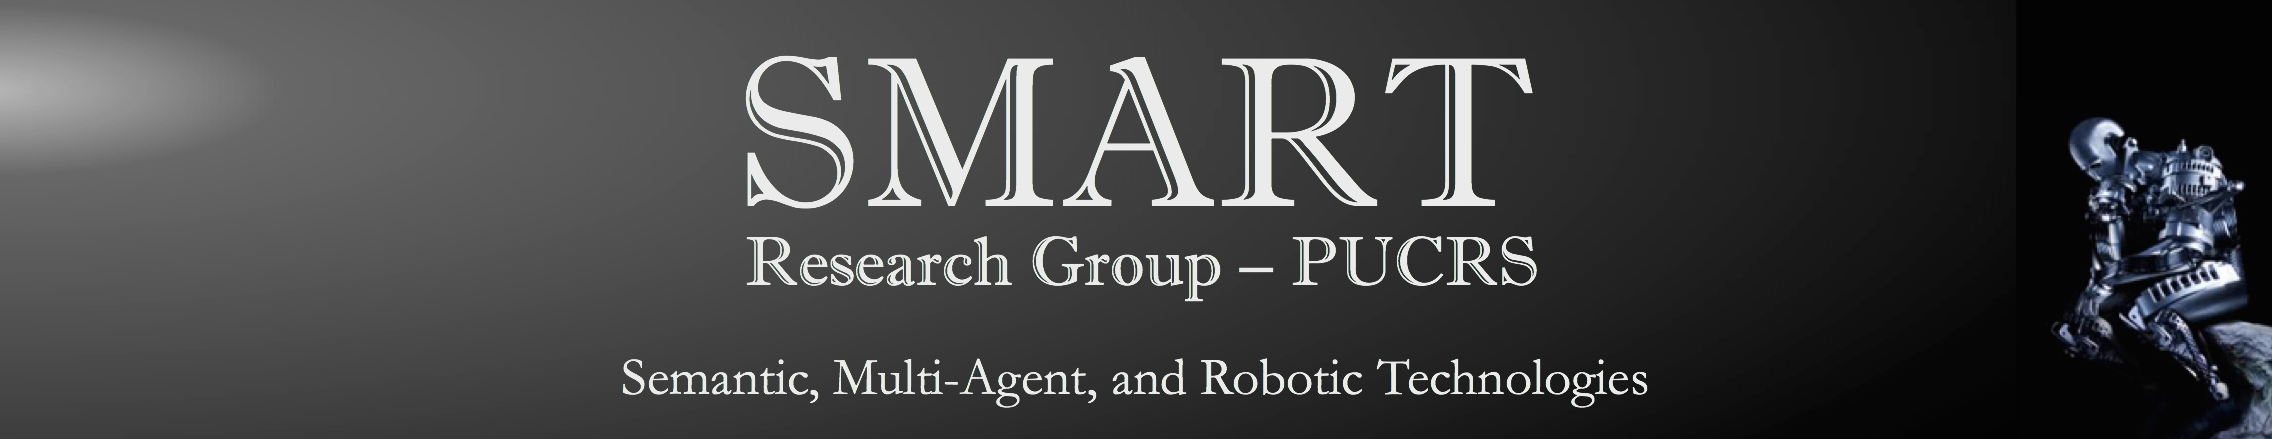 Research Group on Semantic, Multi-Agent, and Robotic Technologies (SMART) banner image